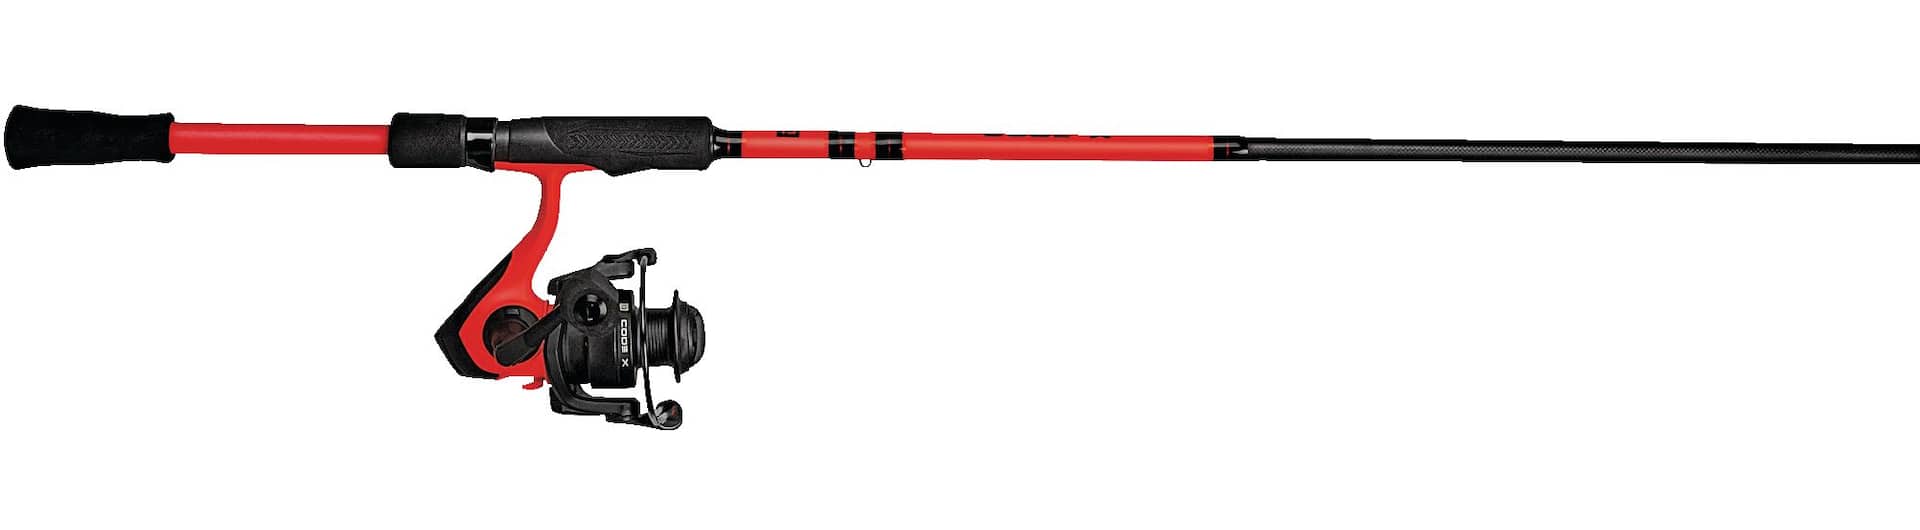 13 Fishing Source F1 7'1 Medium Spinning Combo/ COMES WITH / FREE CAP  /FREE FISH LINE - Bronson